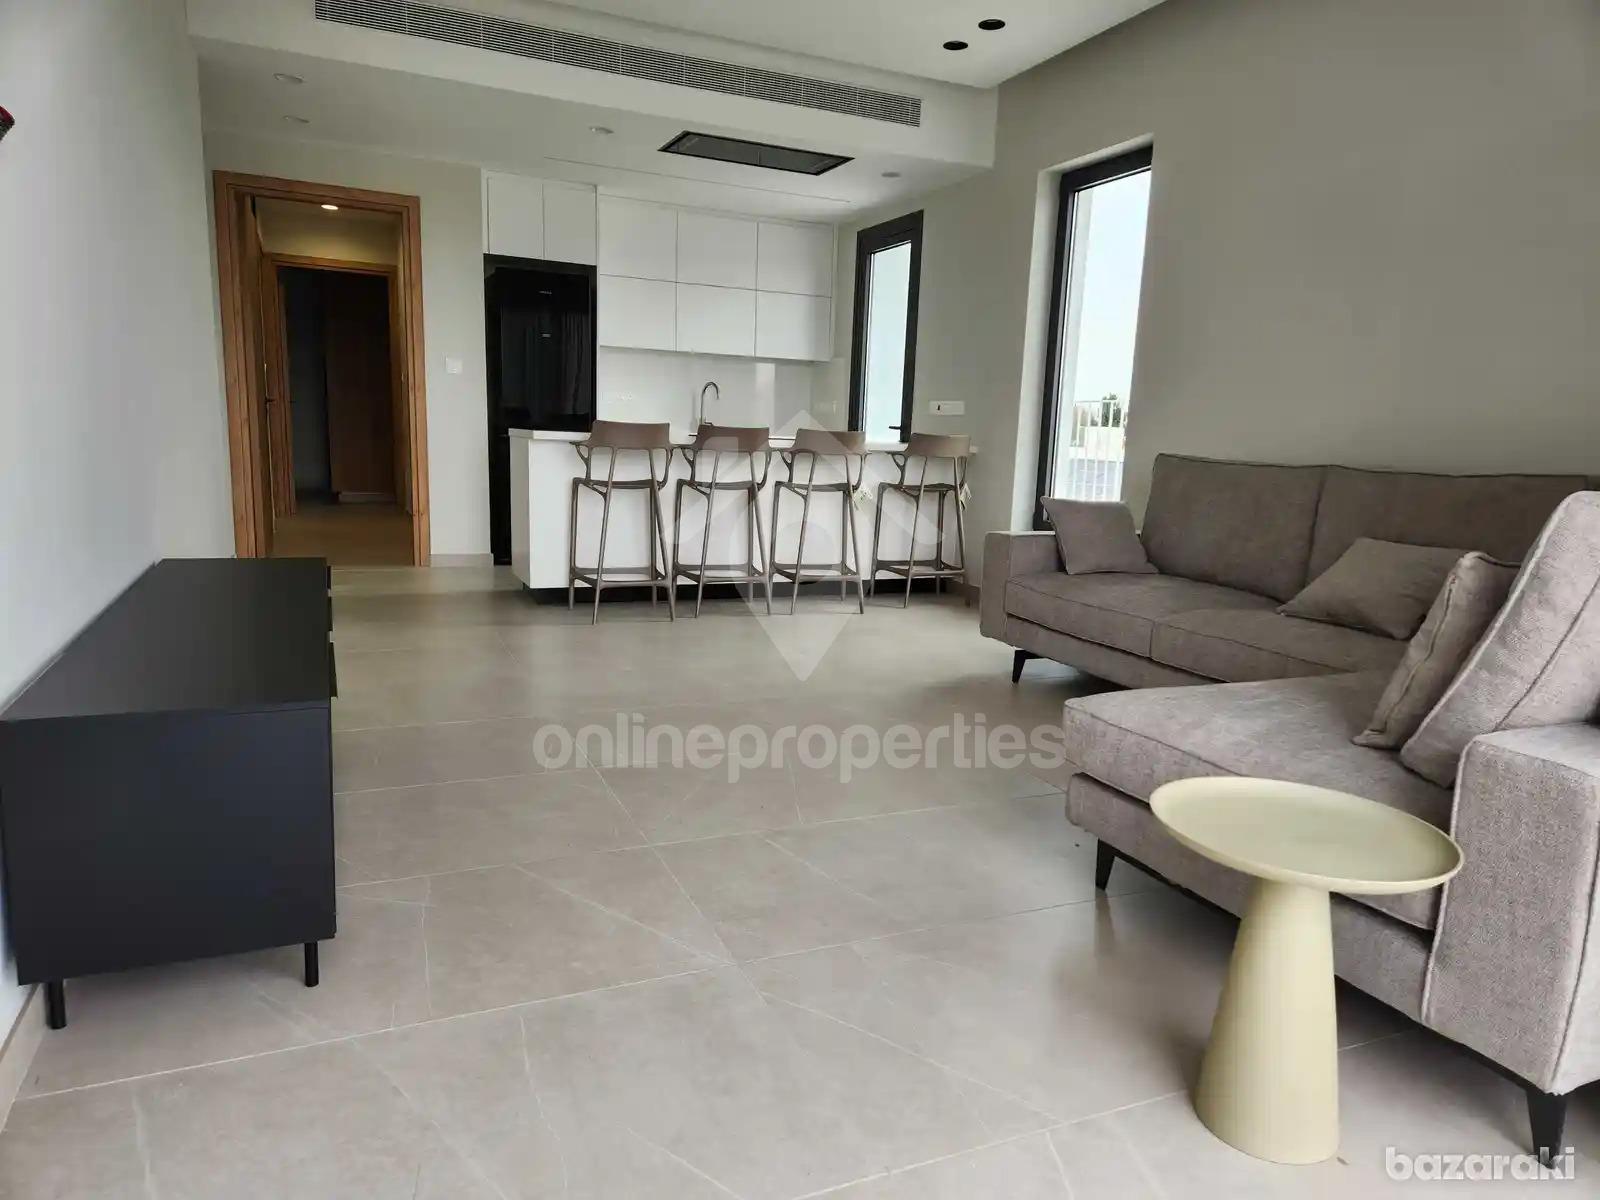 2 bedroom brand new modern apartment located in a contemporary building